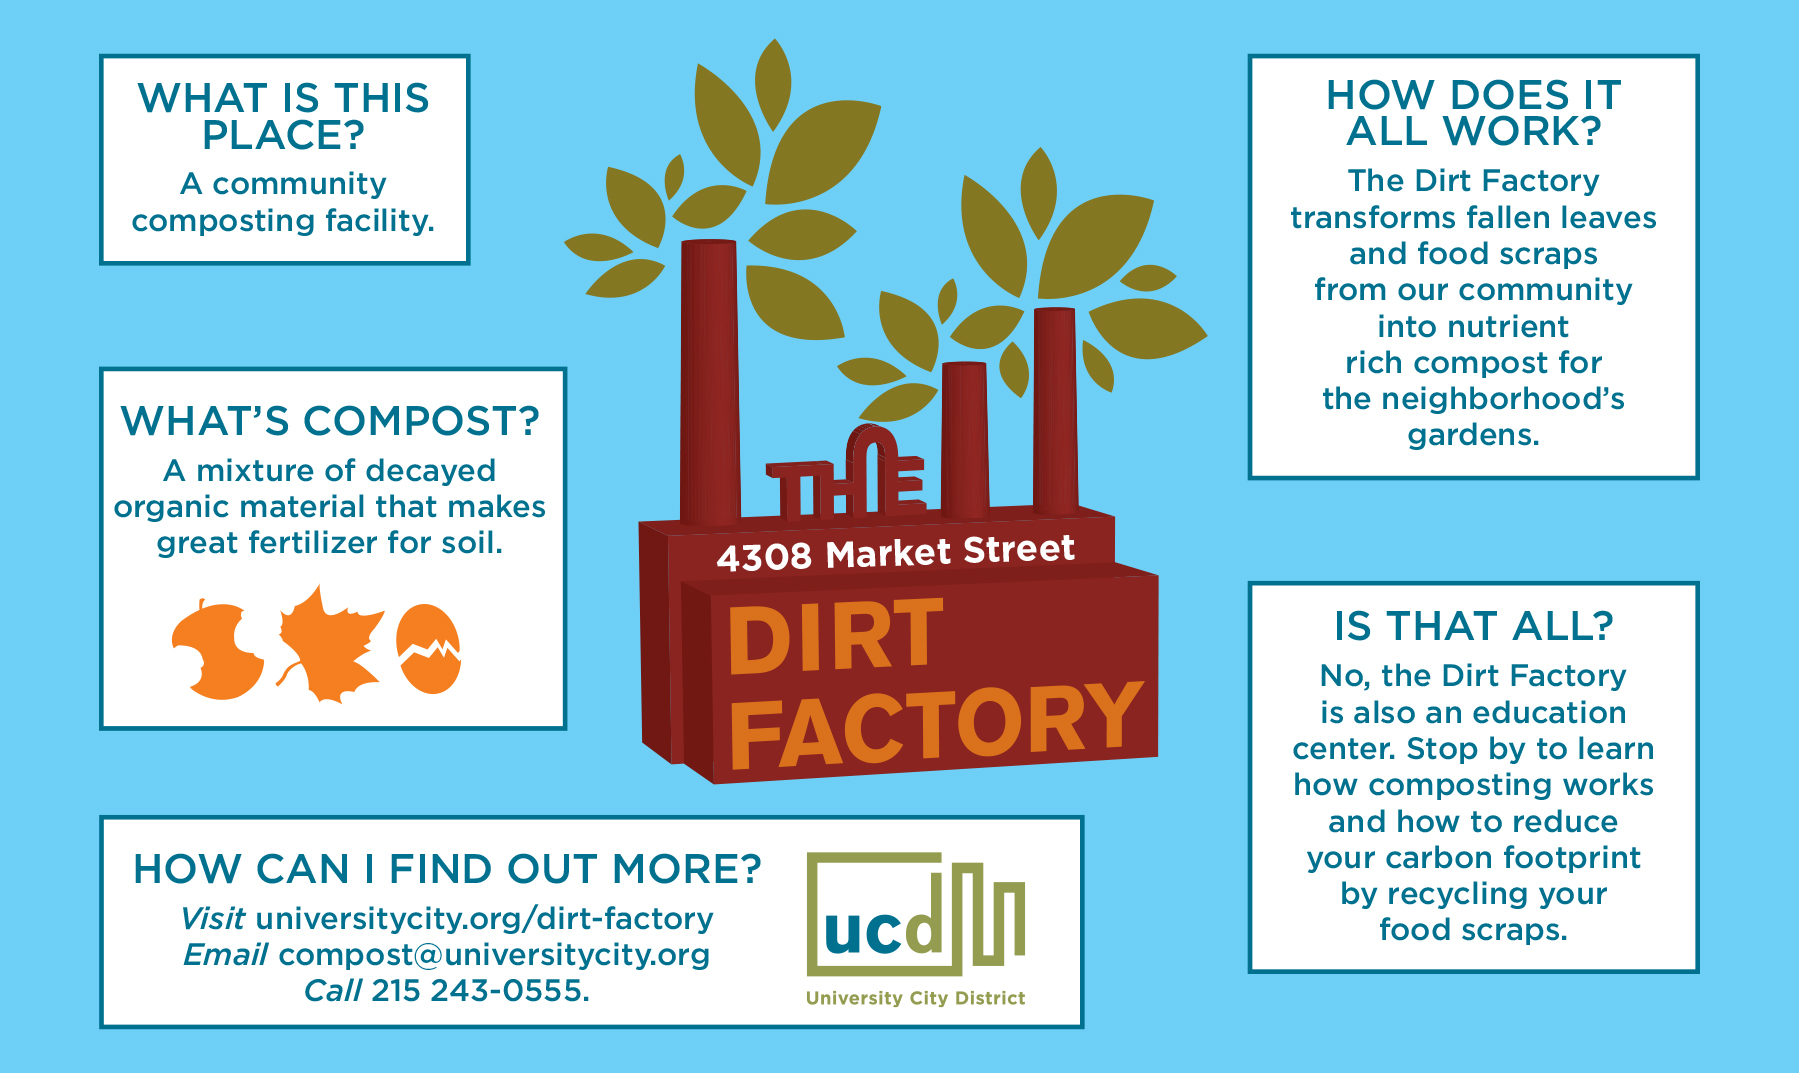 The Dirt Factory at 4308 Market Street, Photo courtesy of UCD